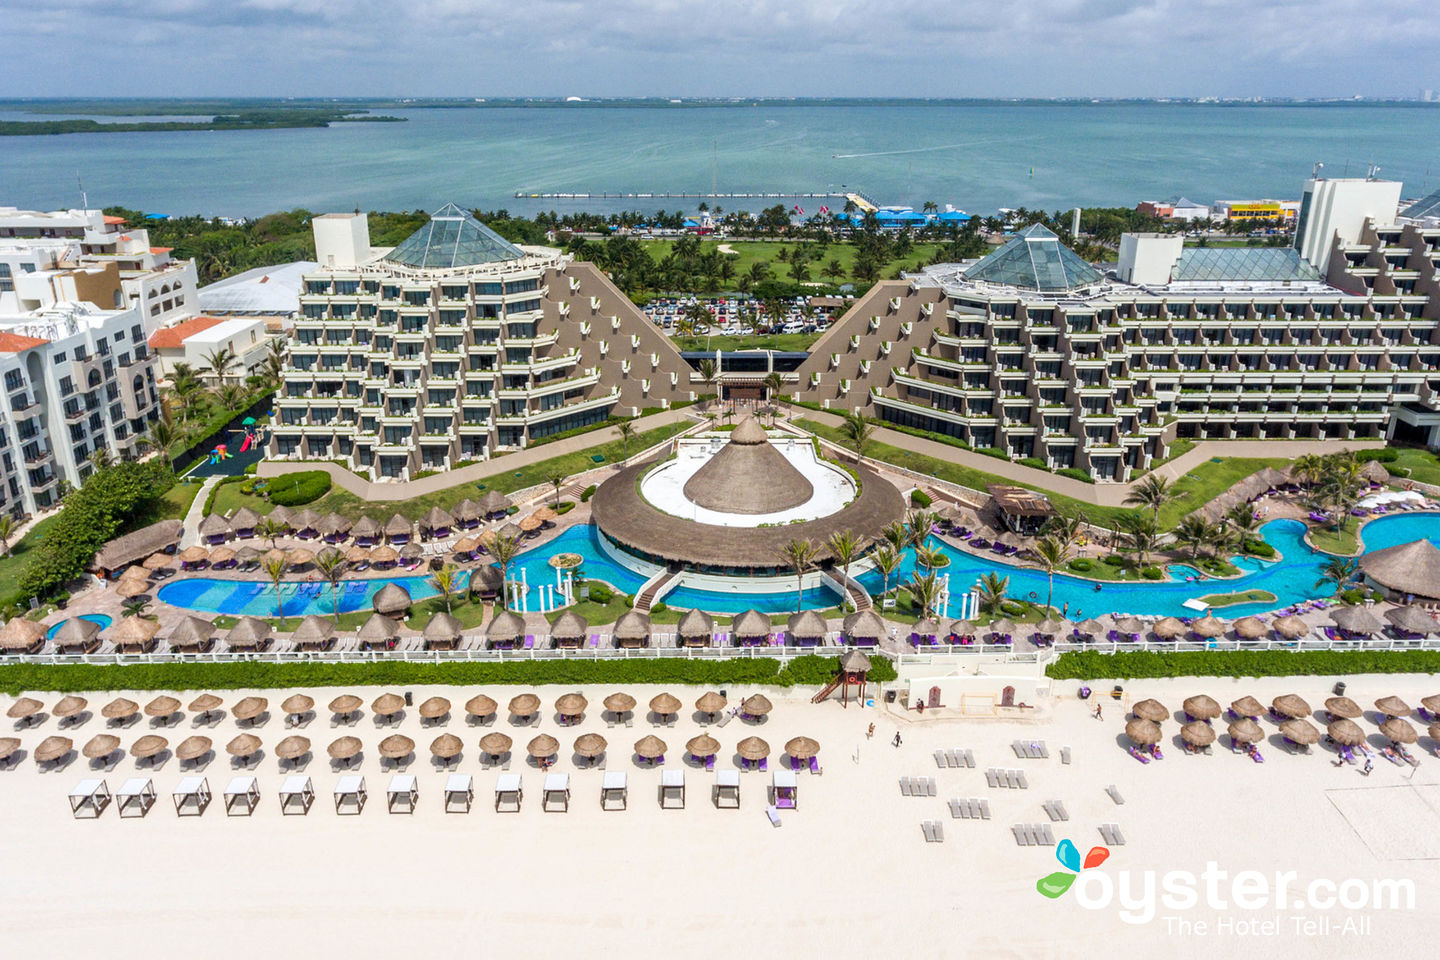 Hotel Paradisus Cancun, Luxury Resort In Cancun, Mexico, 57% OFF